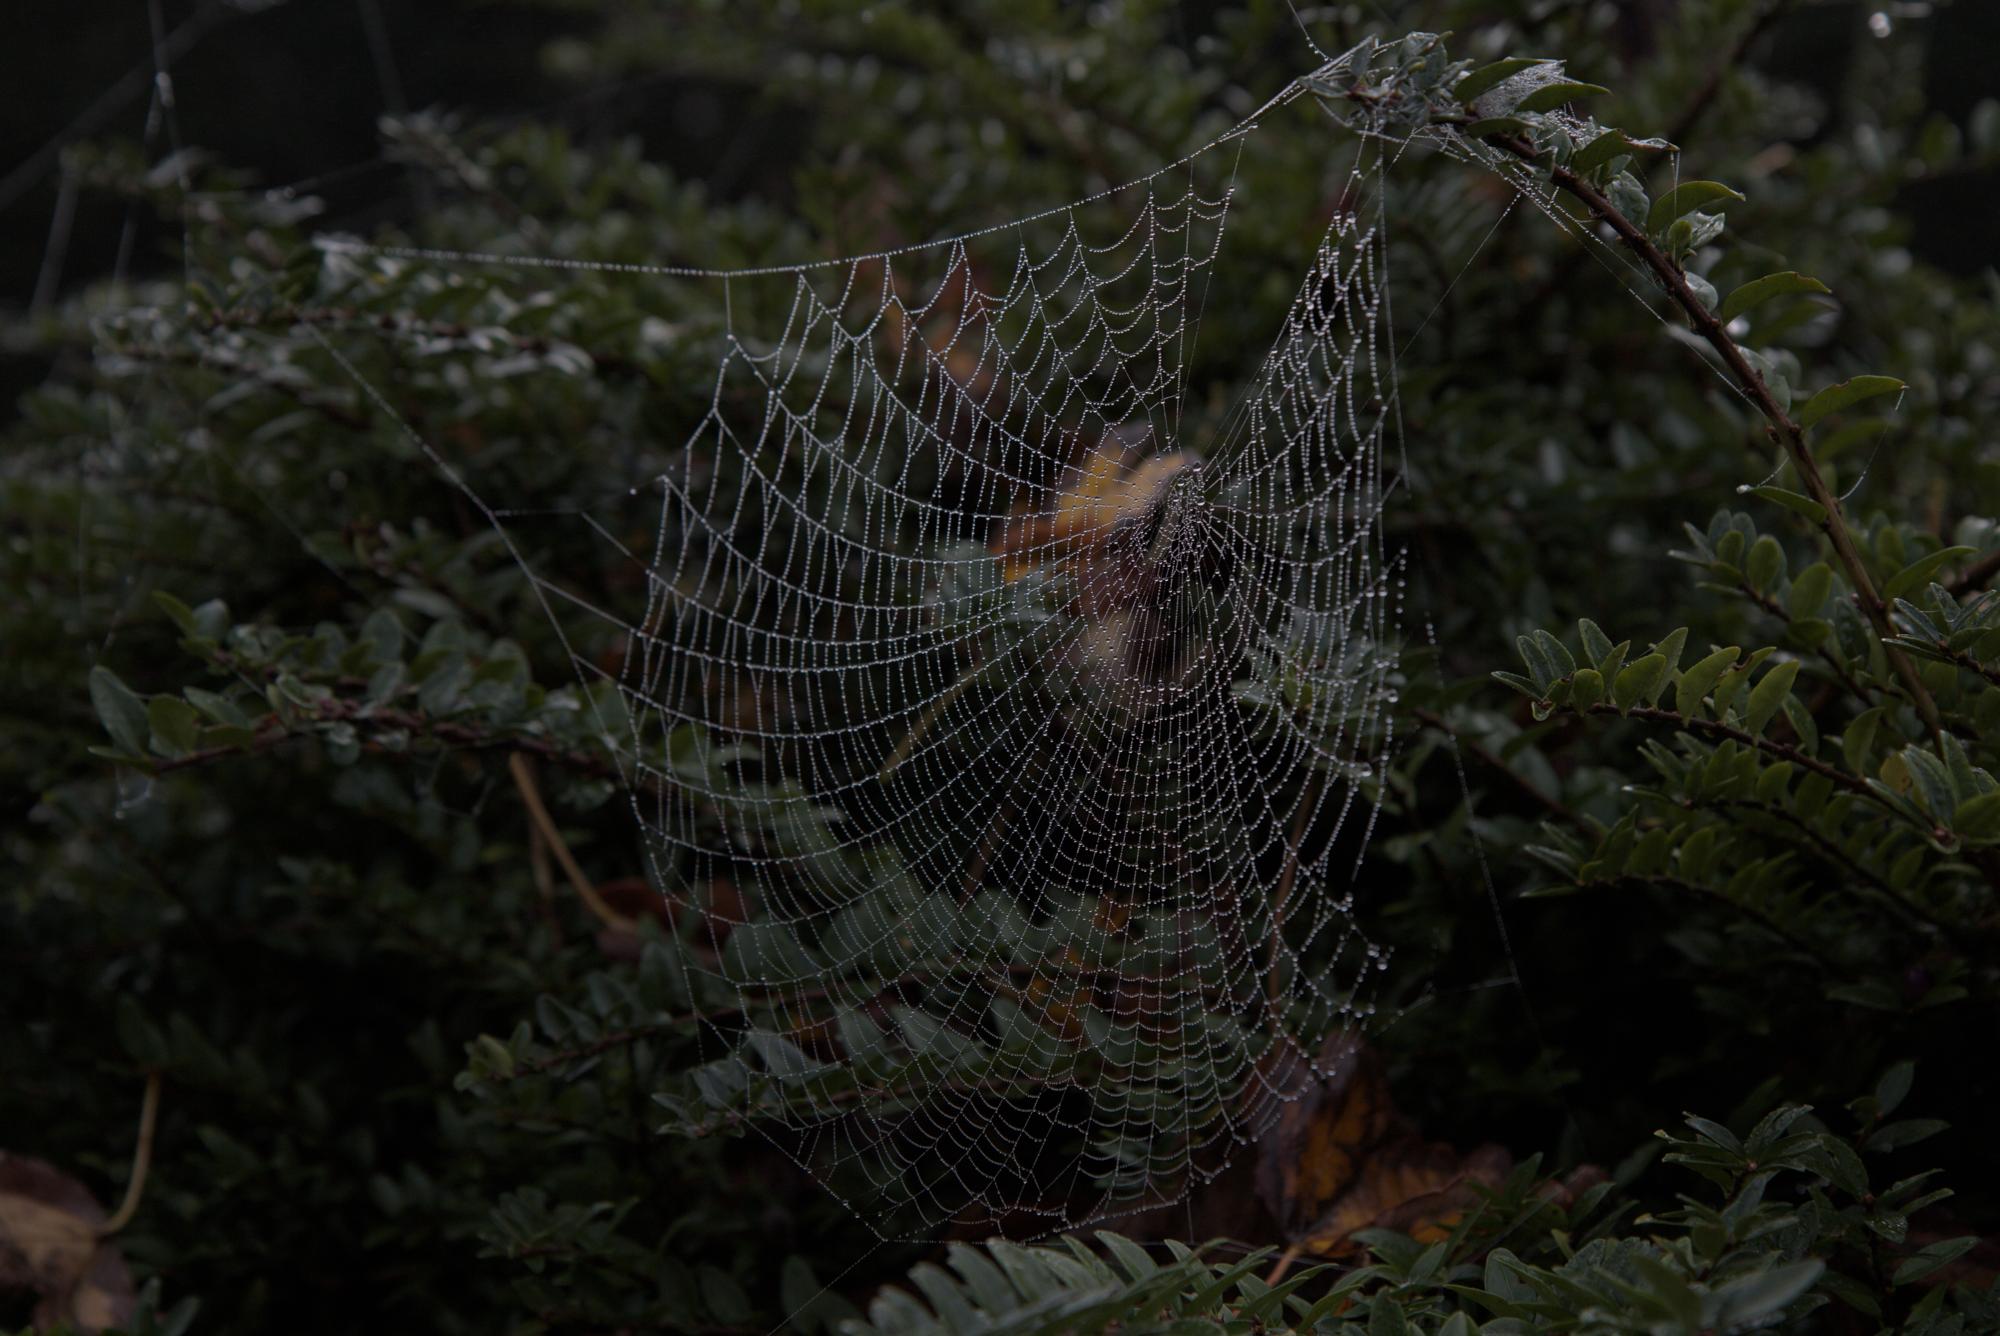 Spider web with dew drops